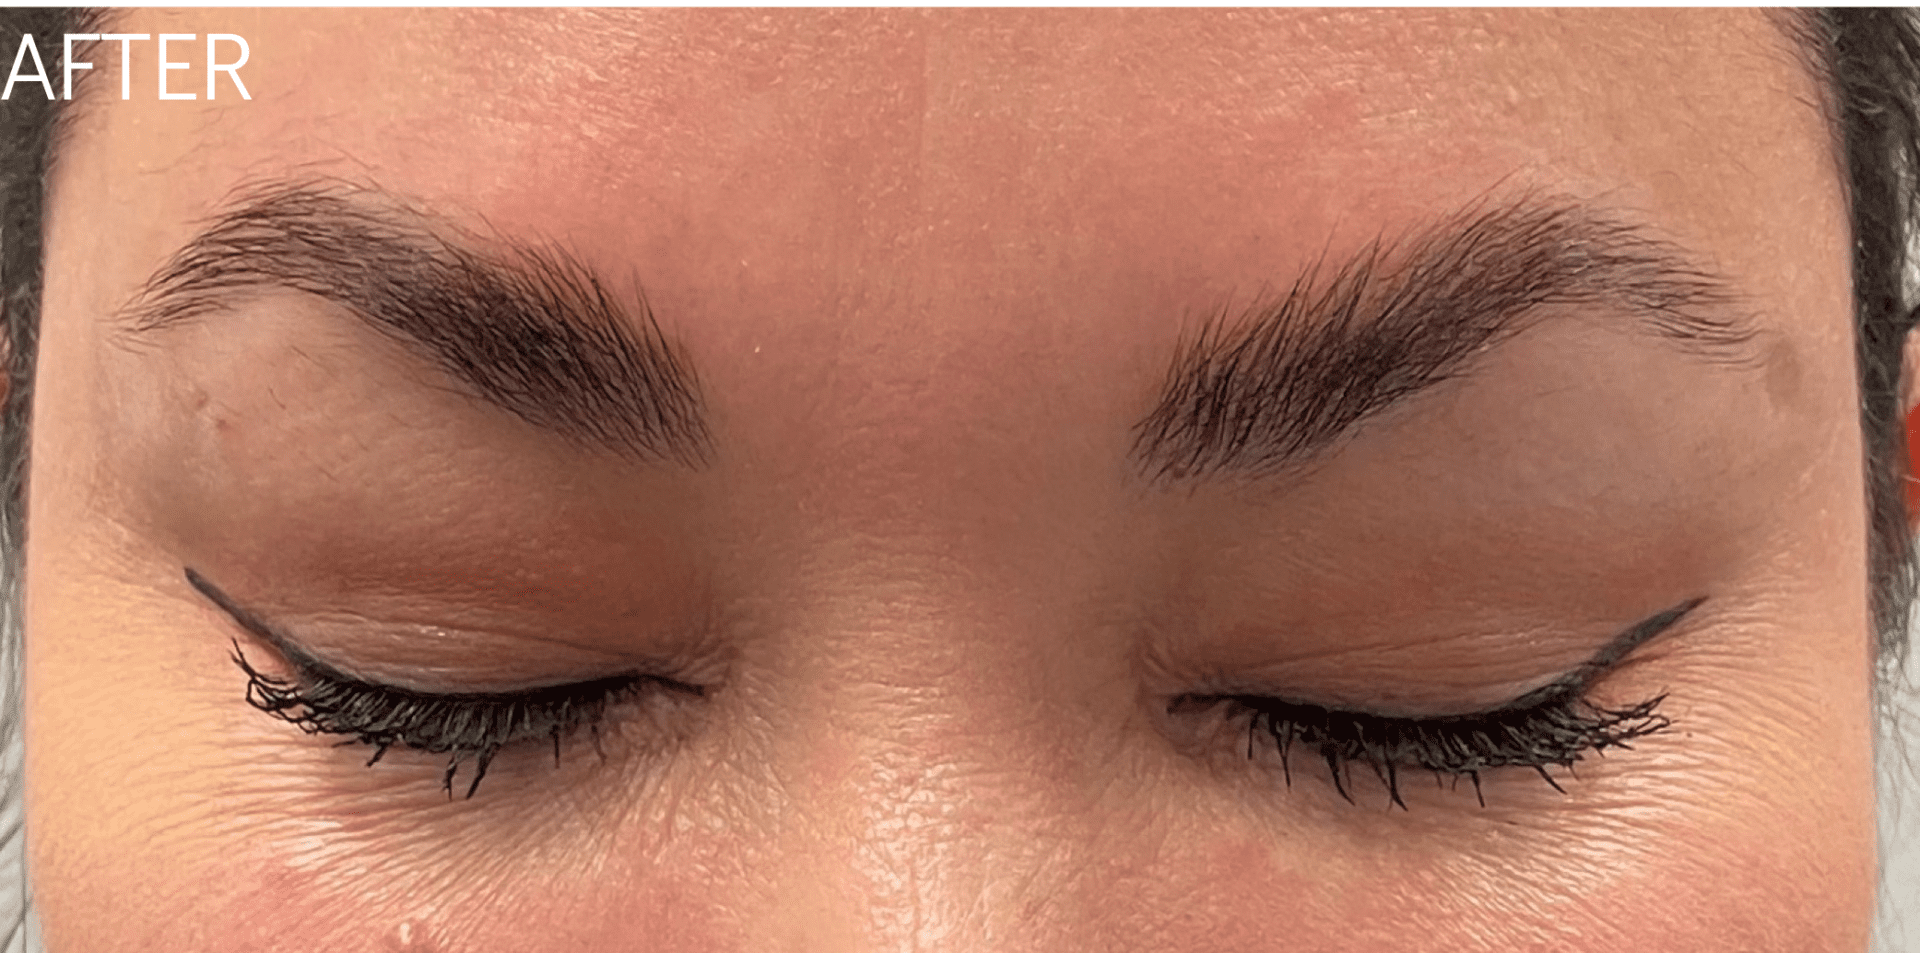 Brow Lamination After - Spa Services and Spa Treatment in Birmingham | Spa Cahaba